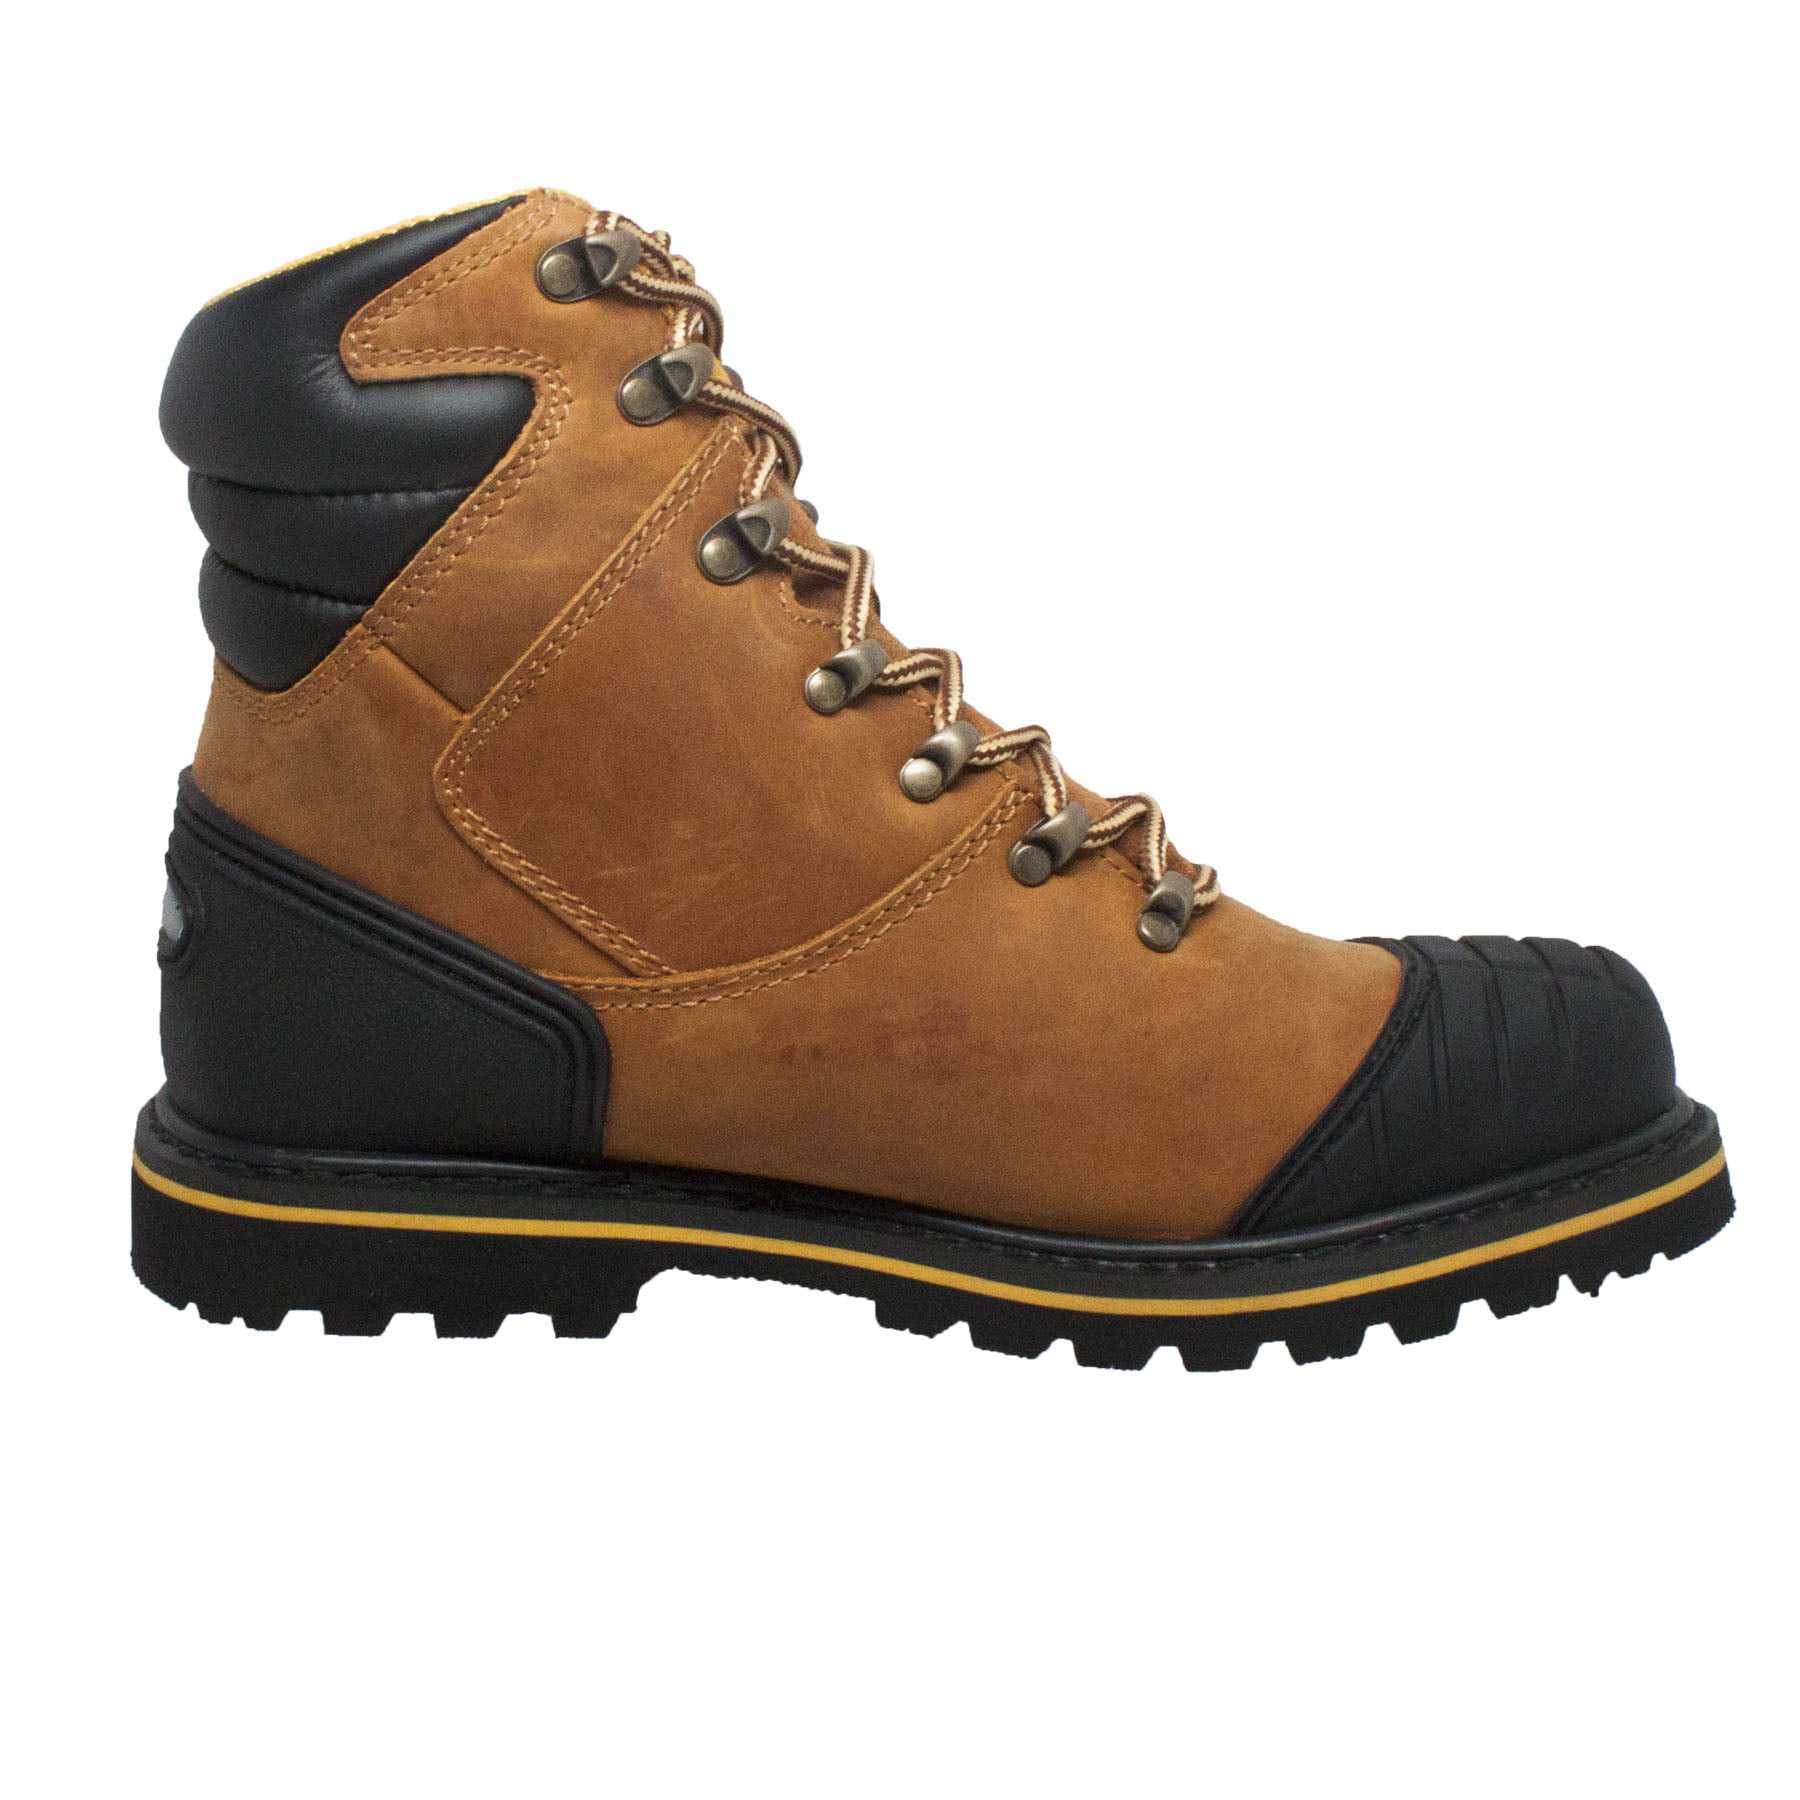 Mens Dickies Canton Safety Boot Leather Steel Toe Work Workwear Brown 